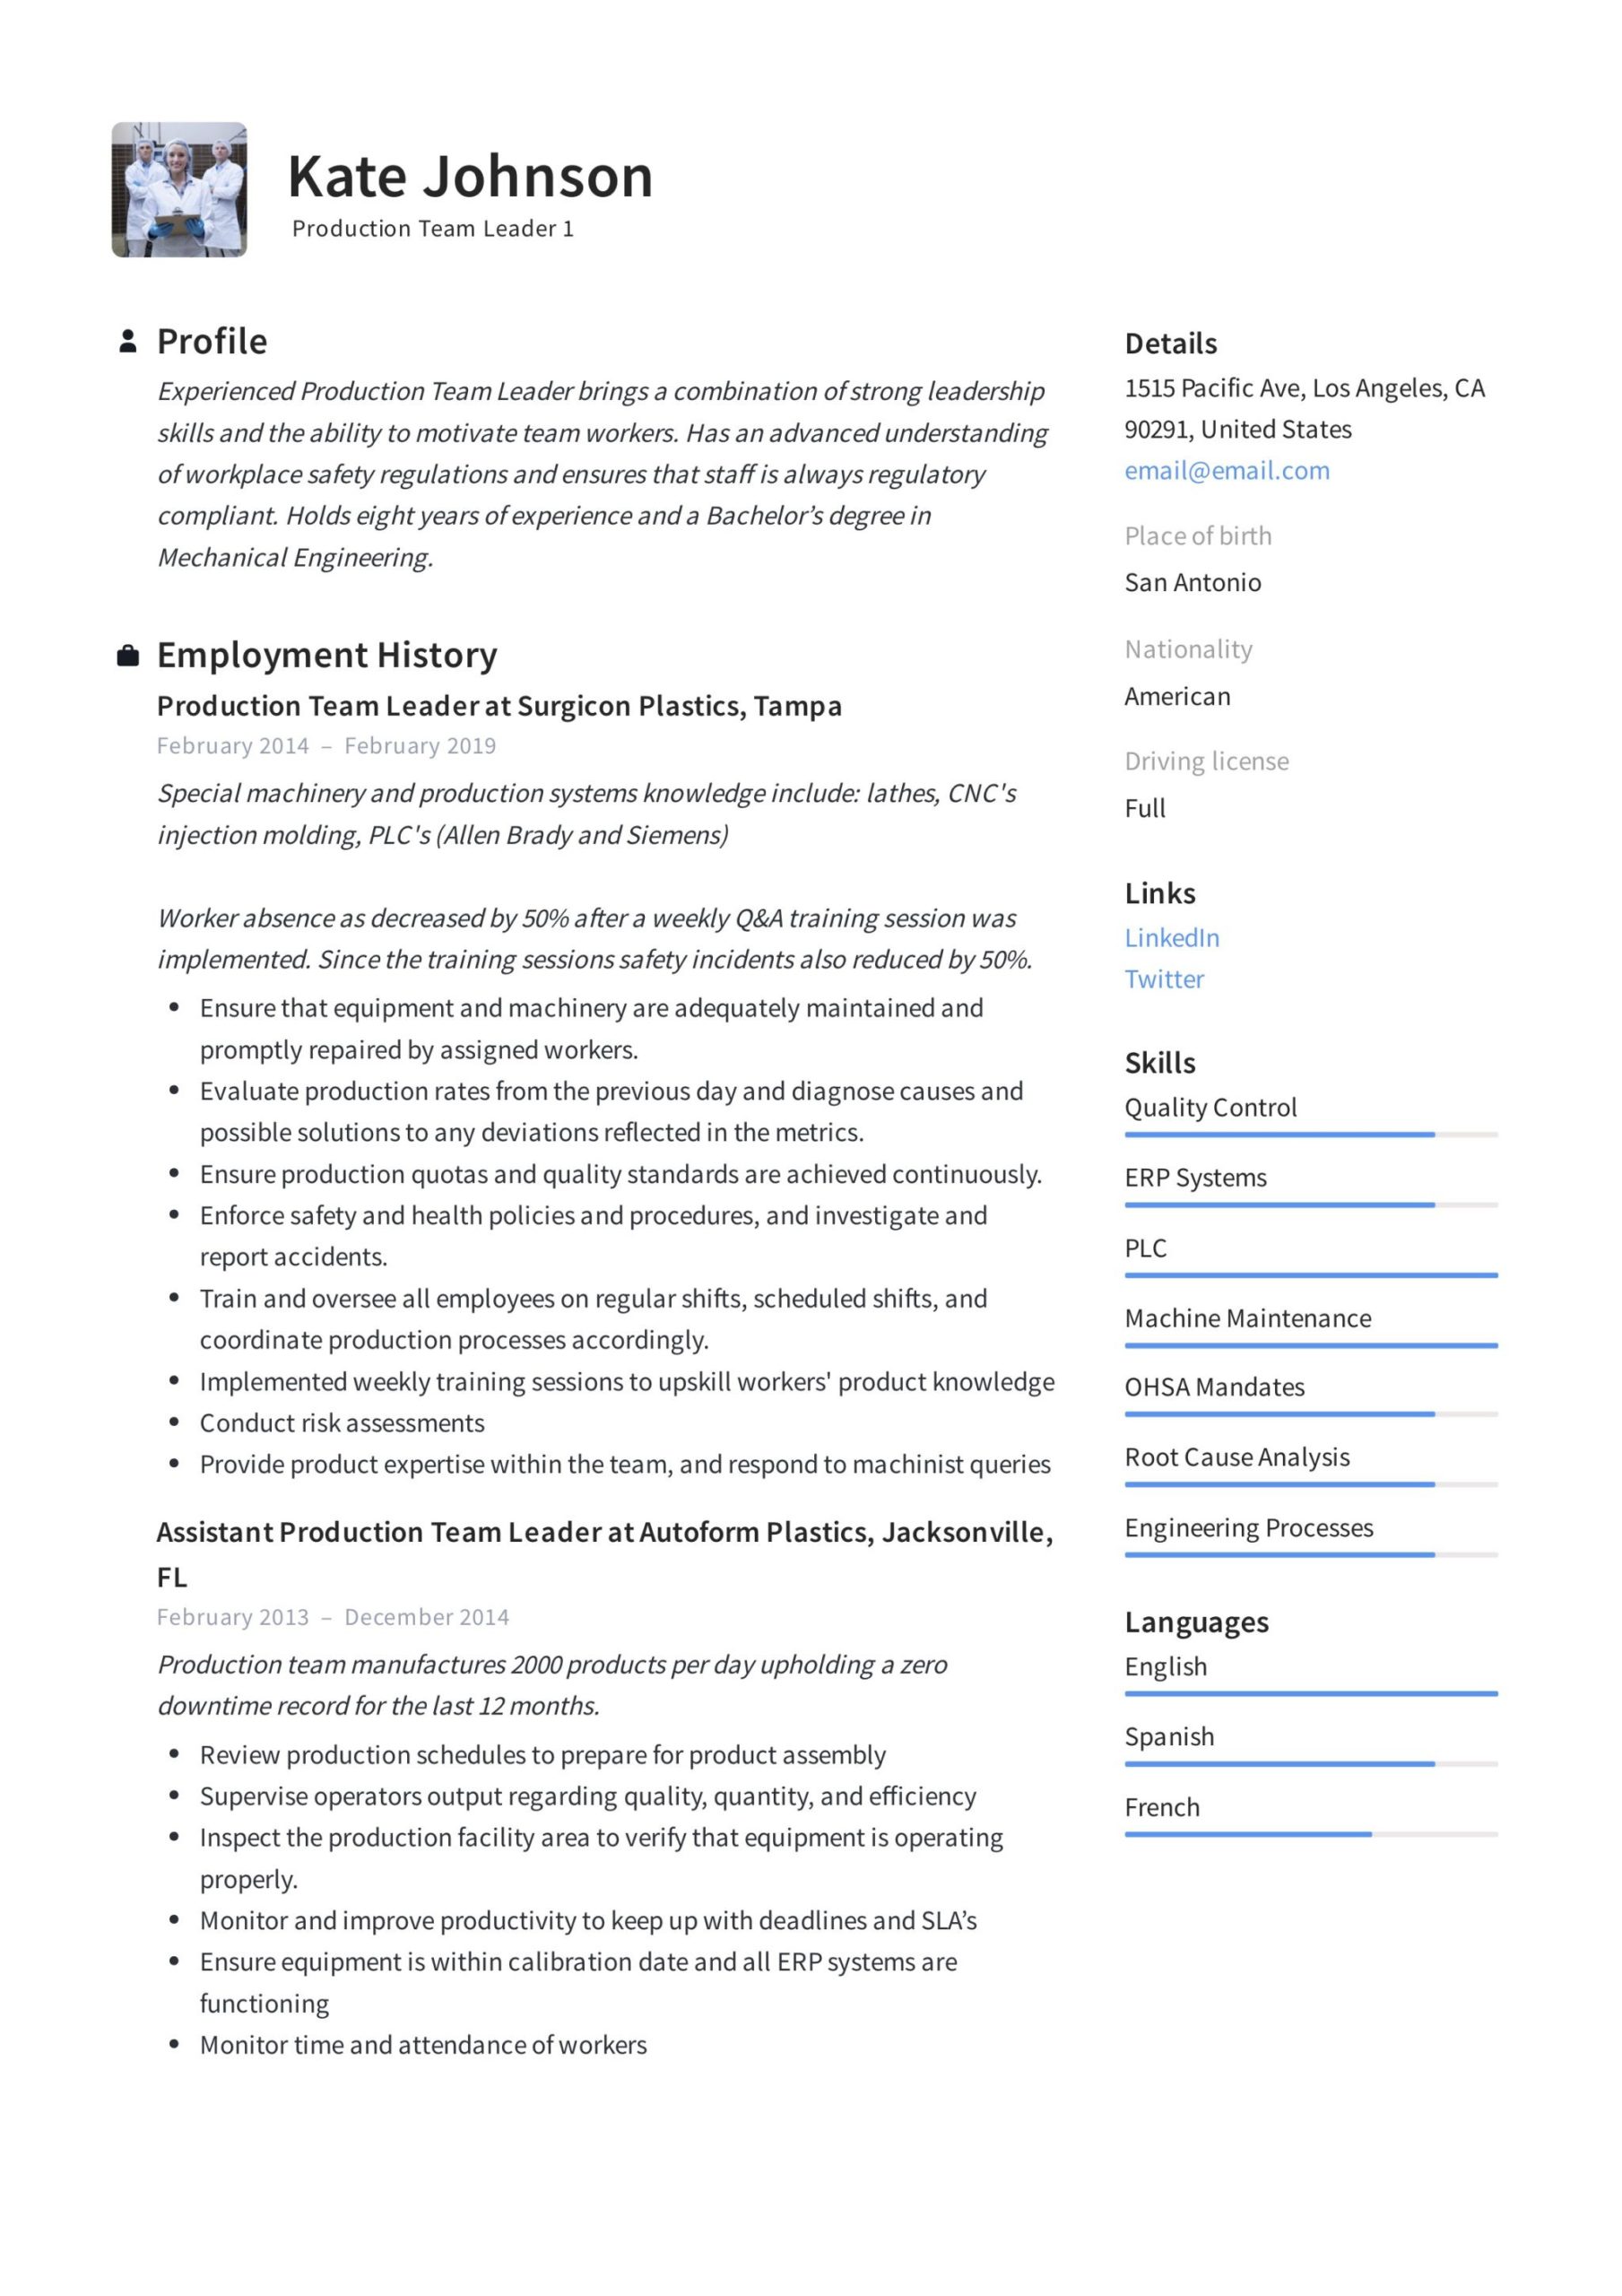 After School Group Leader Sample Resume Full Guide: Production Team Leader Resume 12 Examples